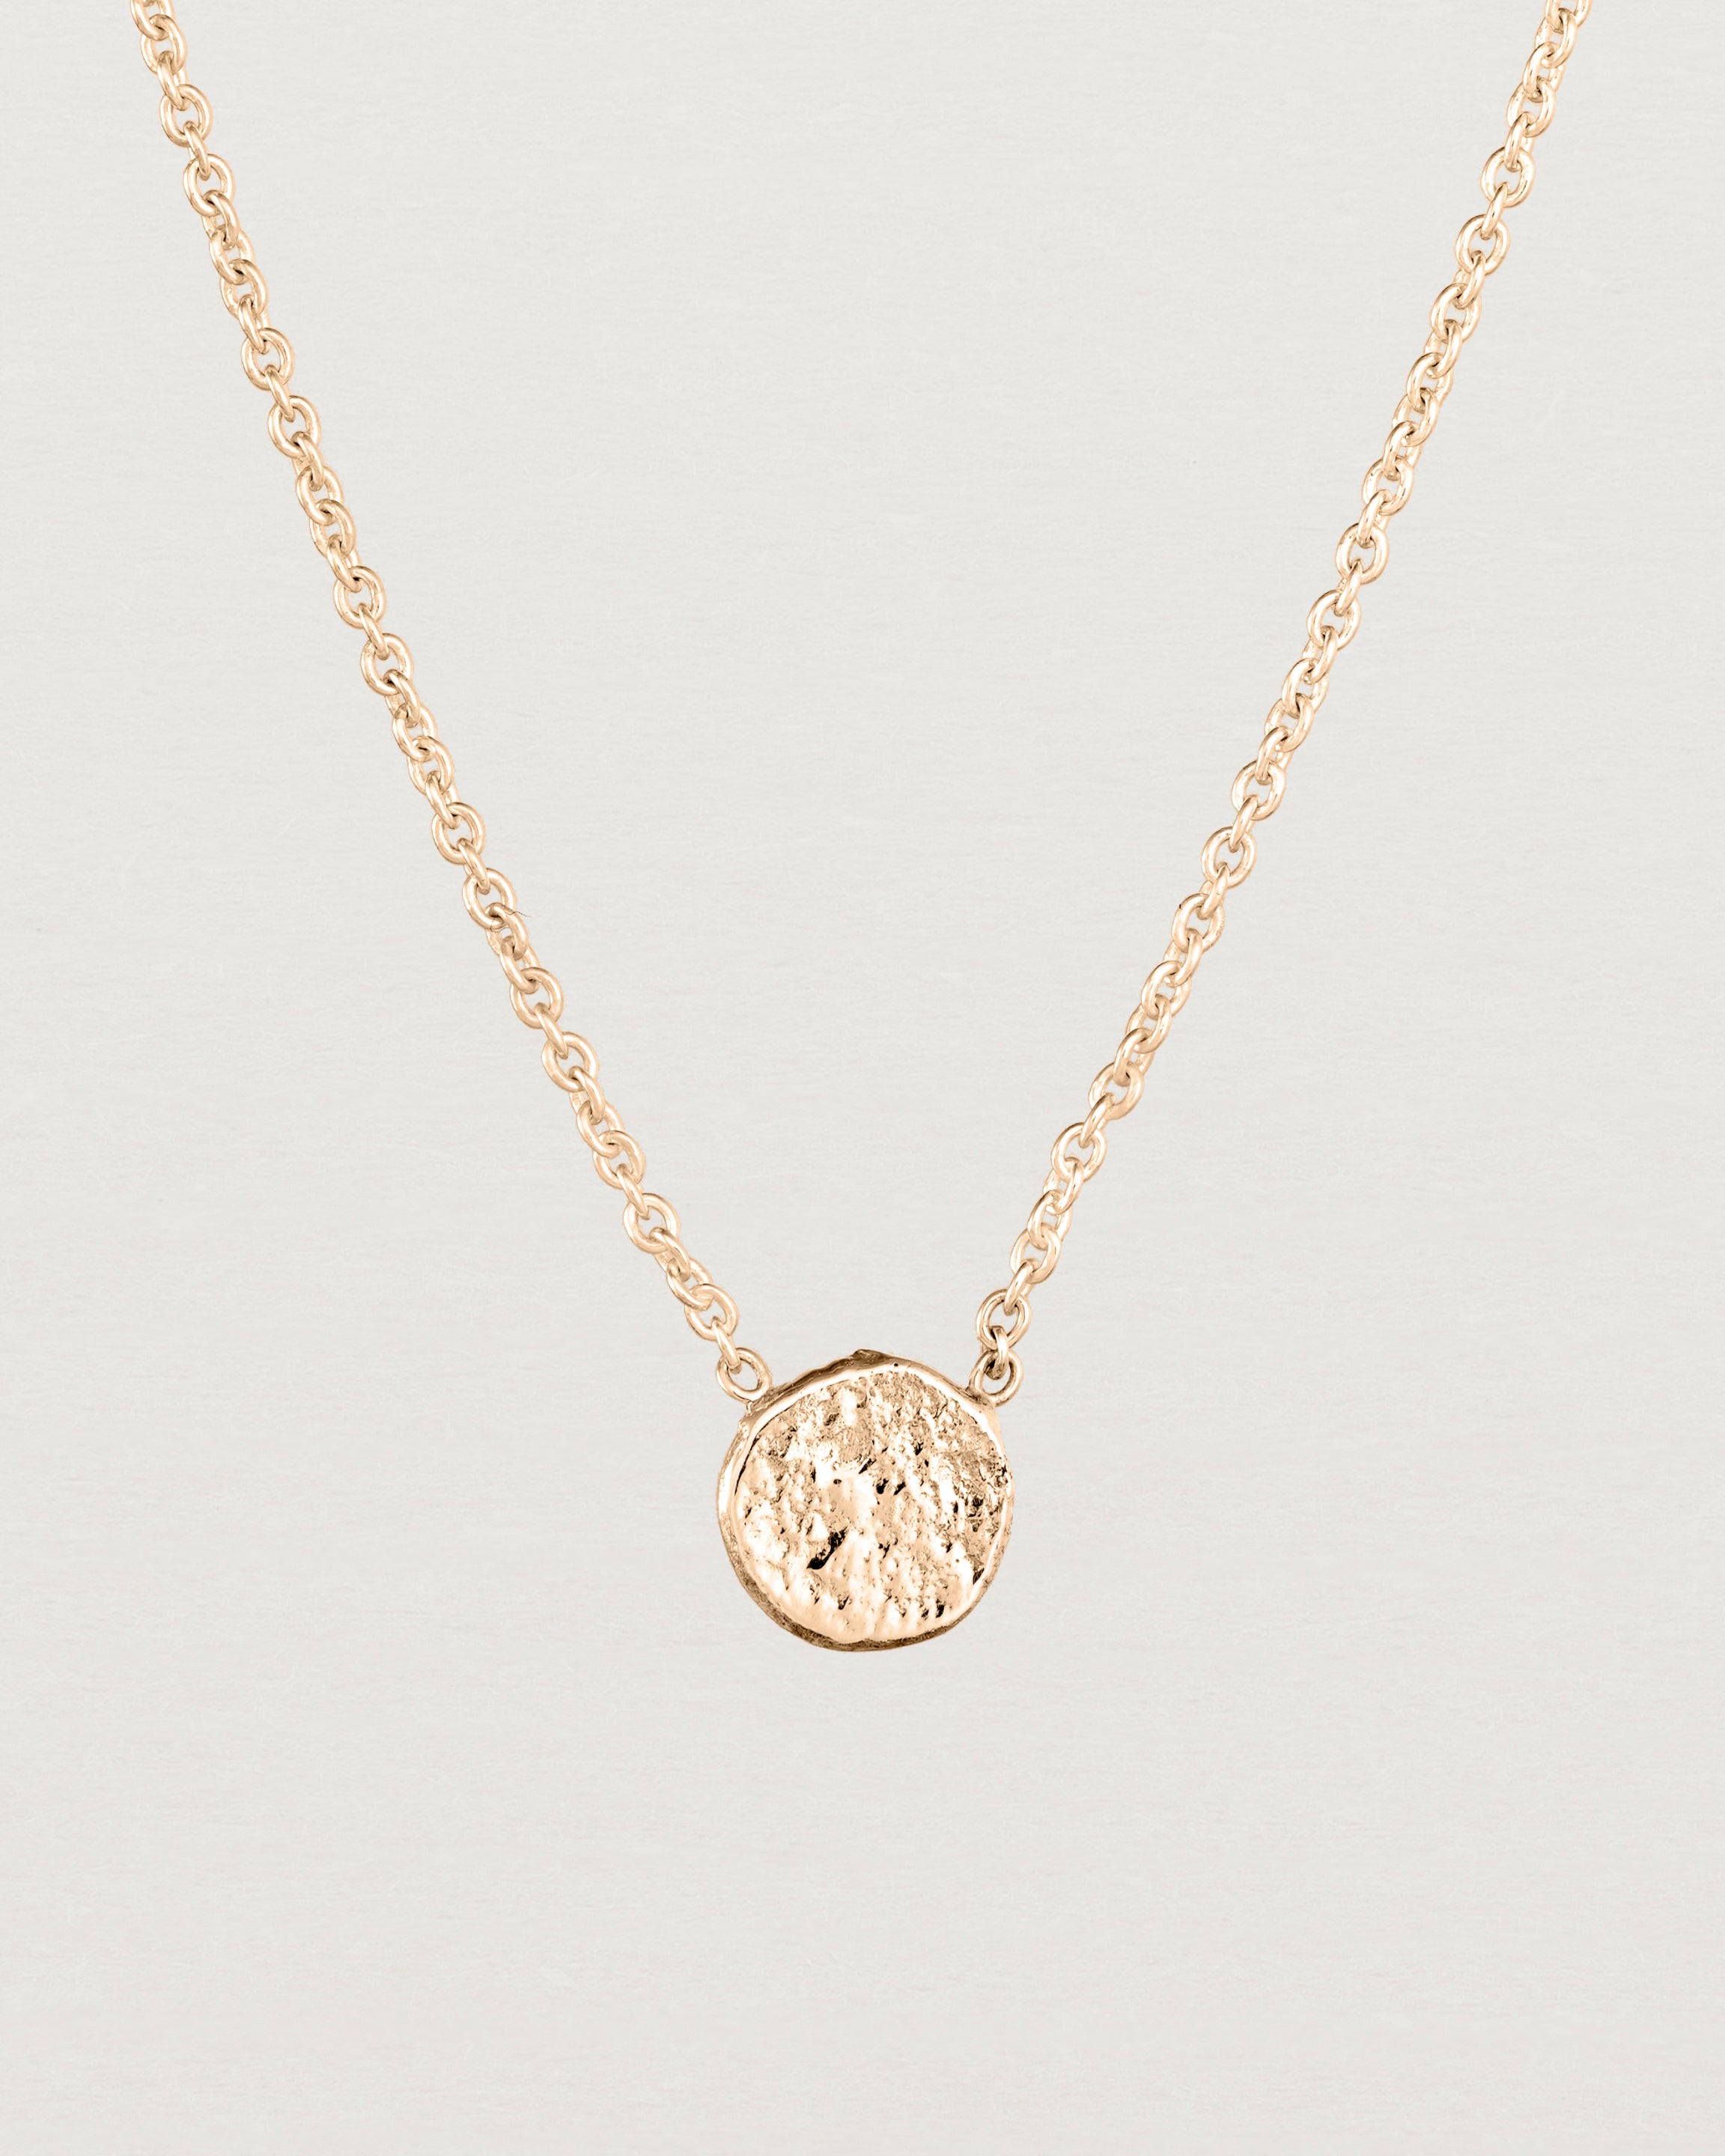 Close up view of the Moon Necklace in rose gold.